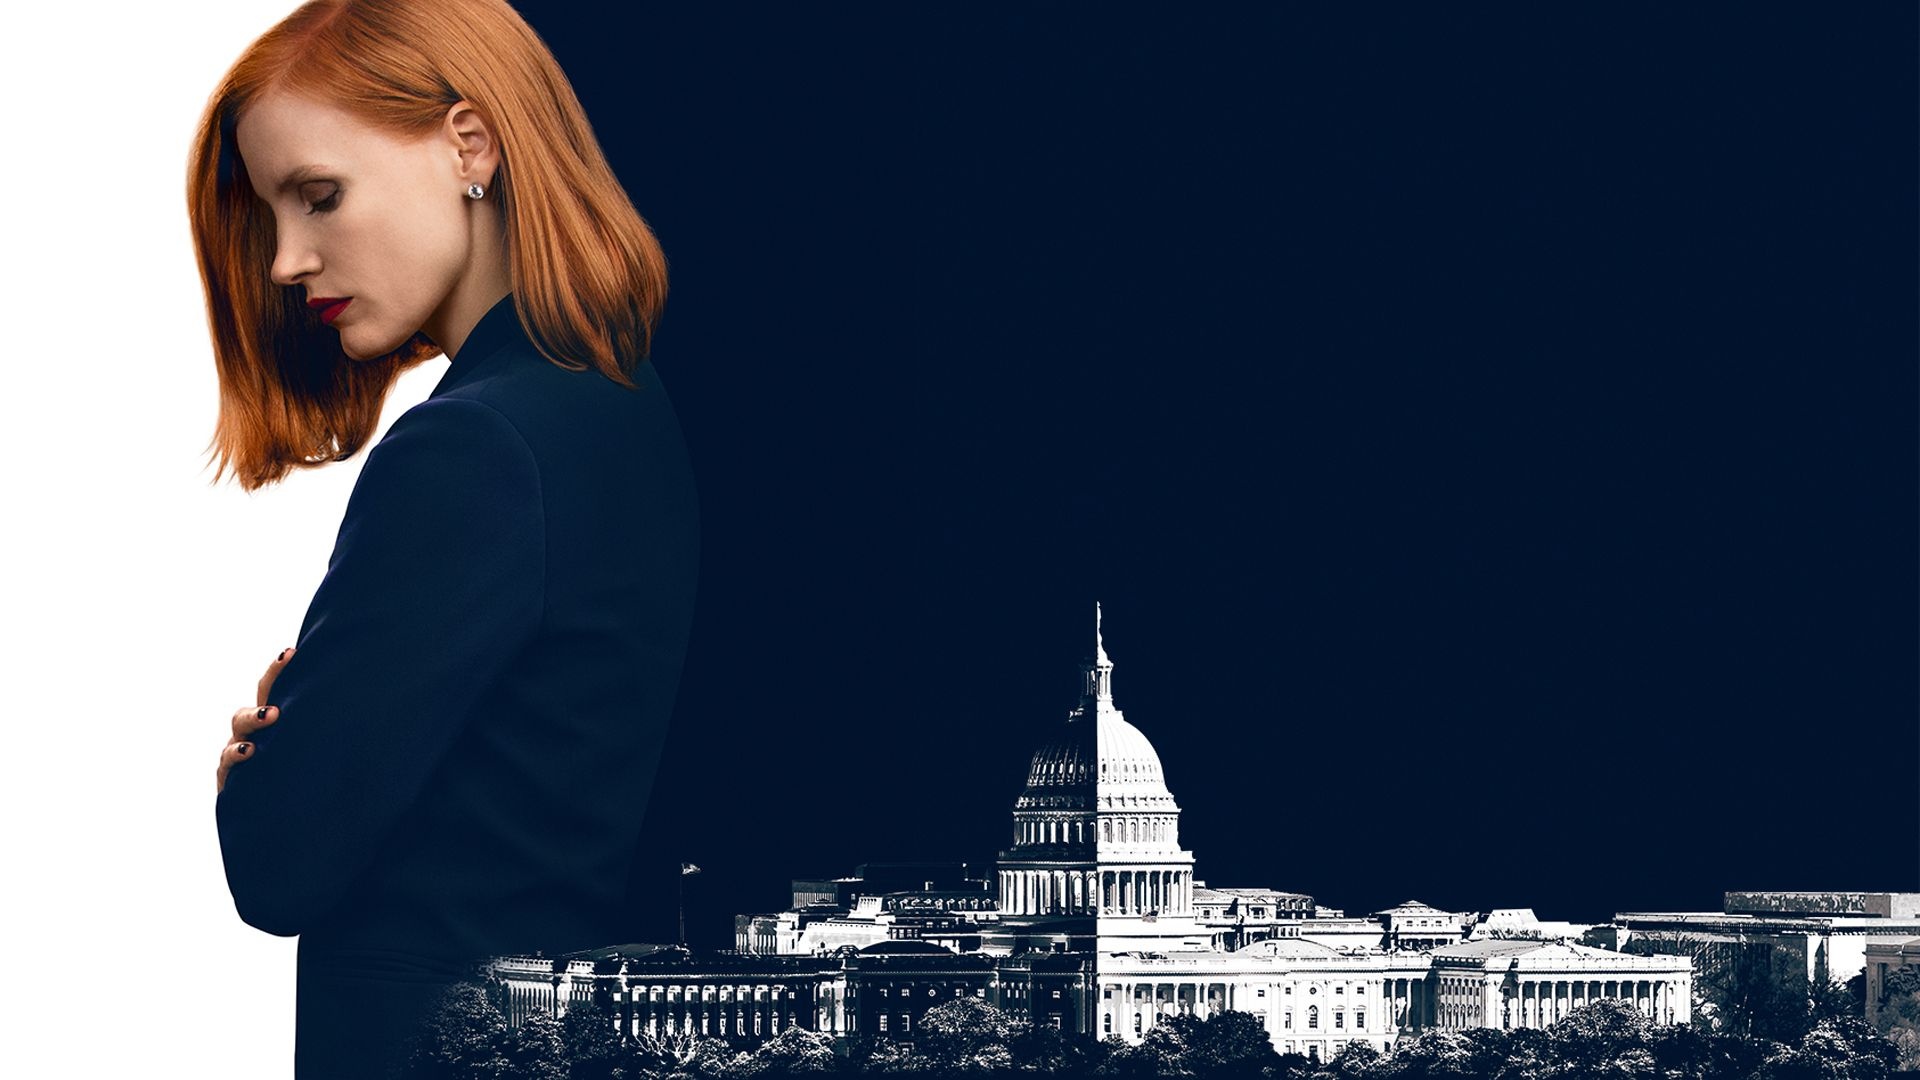 Miss Sloane: The screenplay was ranked in the top five of Hollywood's 2015 Black List. 1920x1080 Full HD Wallpaper.